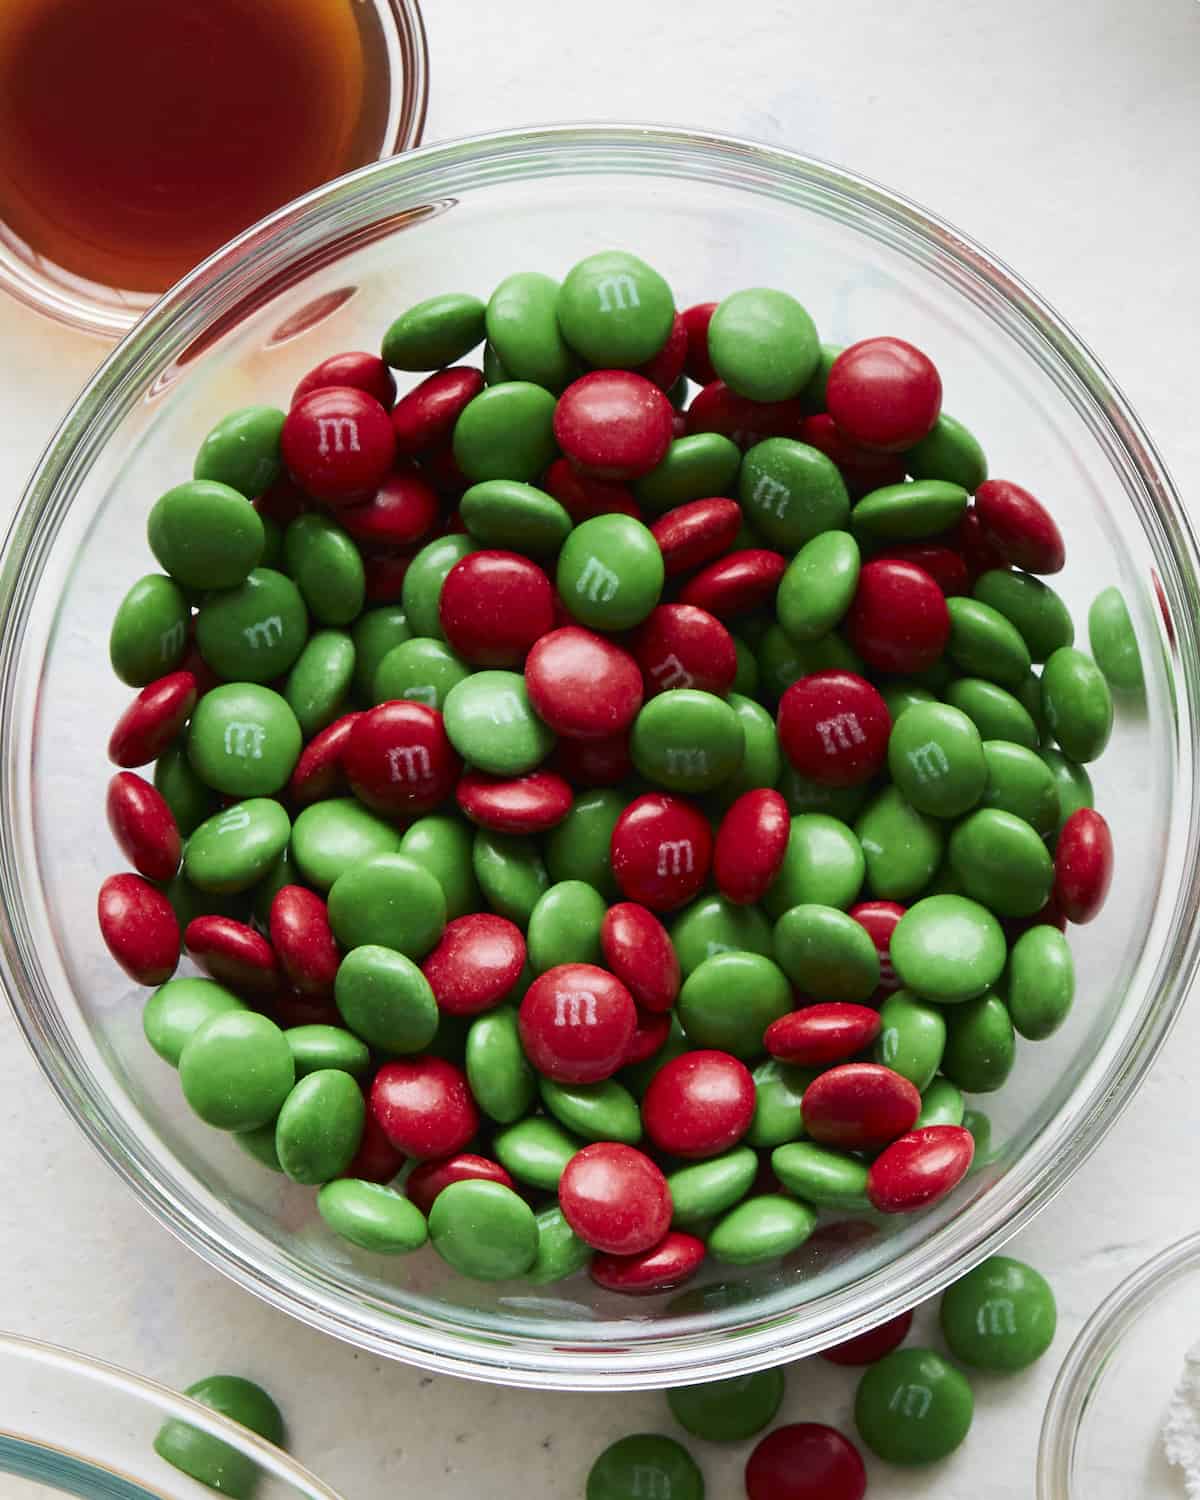 A glass bowl with red and green M&Ms with some M&Ms outside the bowl on the counter.